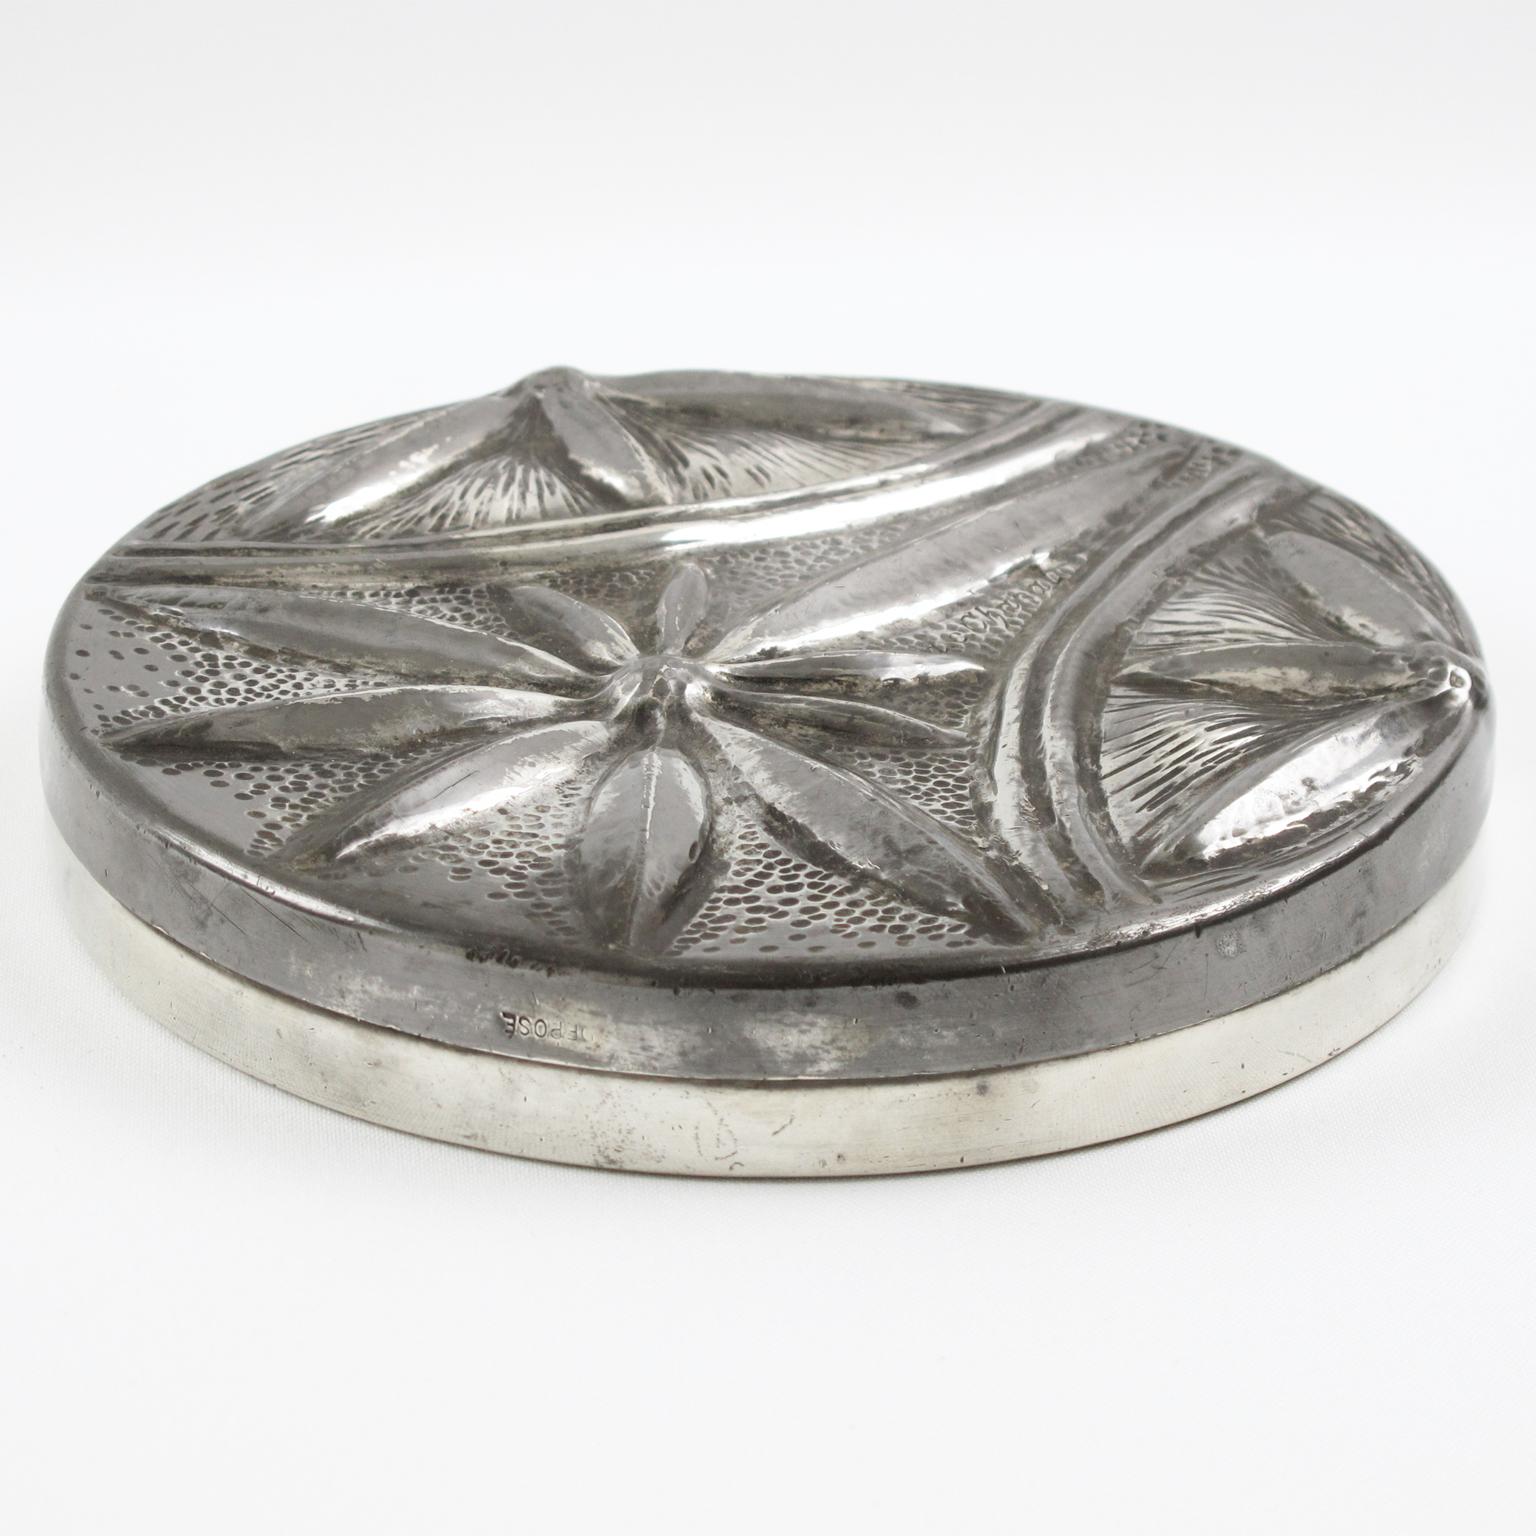 Elegant French Art Nouveau uniquely illustrated dinanderie pewter covered box by Alice Chanal (1872-1951) and Eugene Louis Chanal (1872-1925). Large hand-wrought round flat shape with typical Art Nouveau floral embossed design. Engraved signature